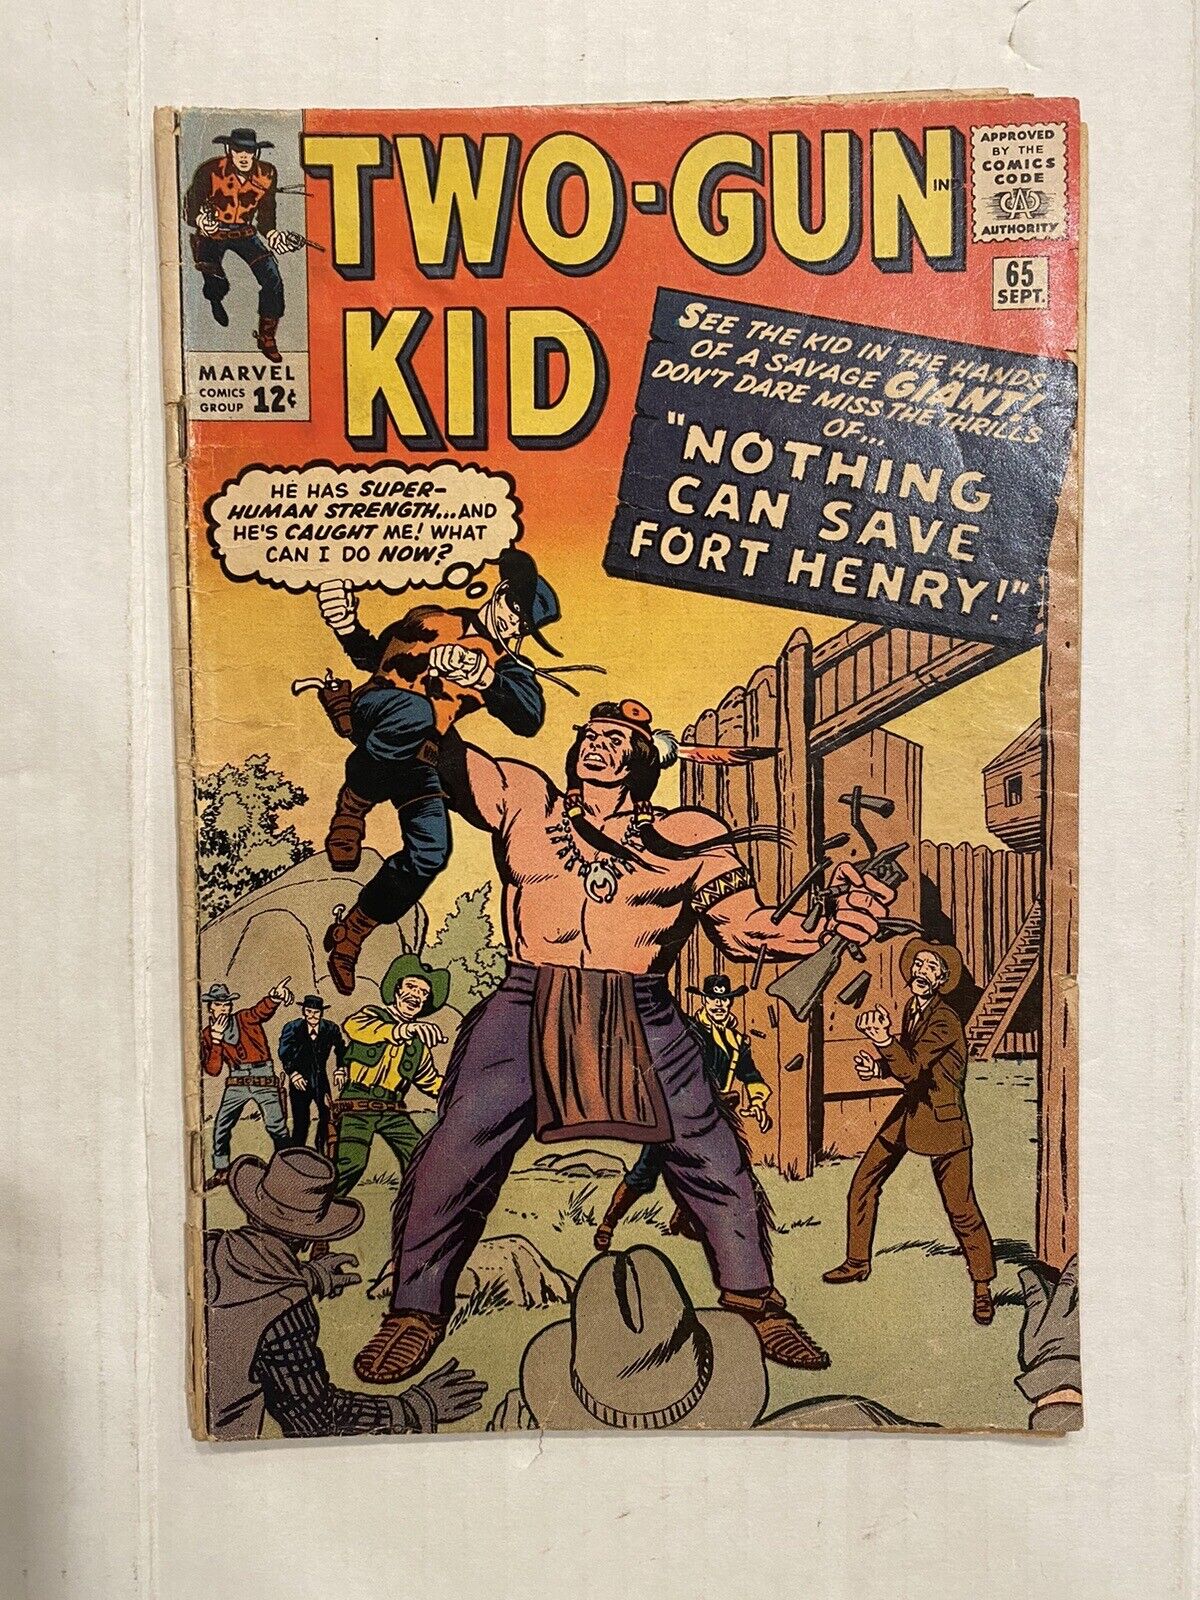 Two Gun Kid 65 Marvel (1963) Stan Lee / Dick Ayers : Nothing Can Save Fort Henry